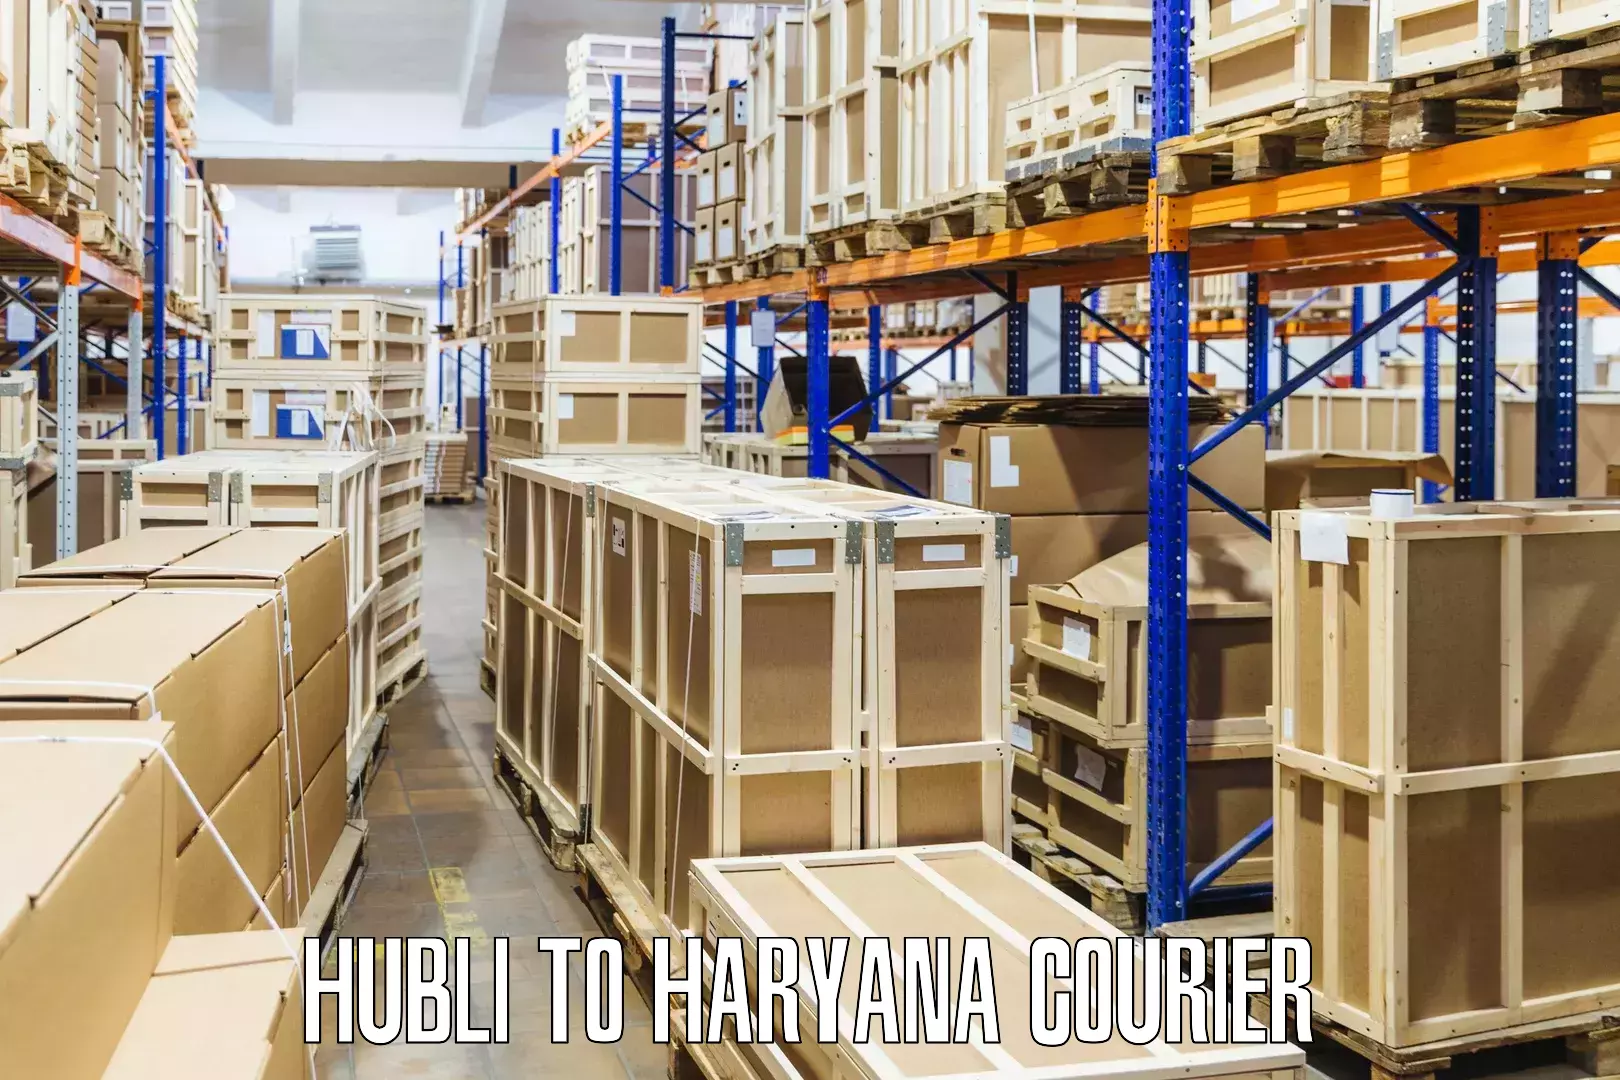 Reliable parcel services in Hubli to Gohana